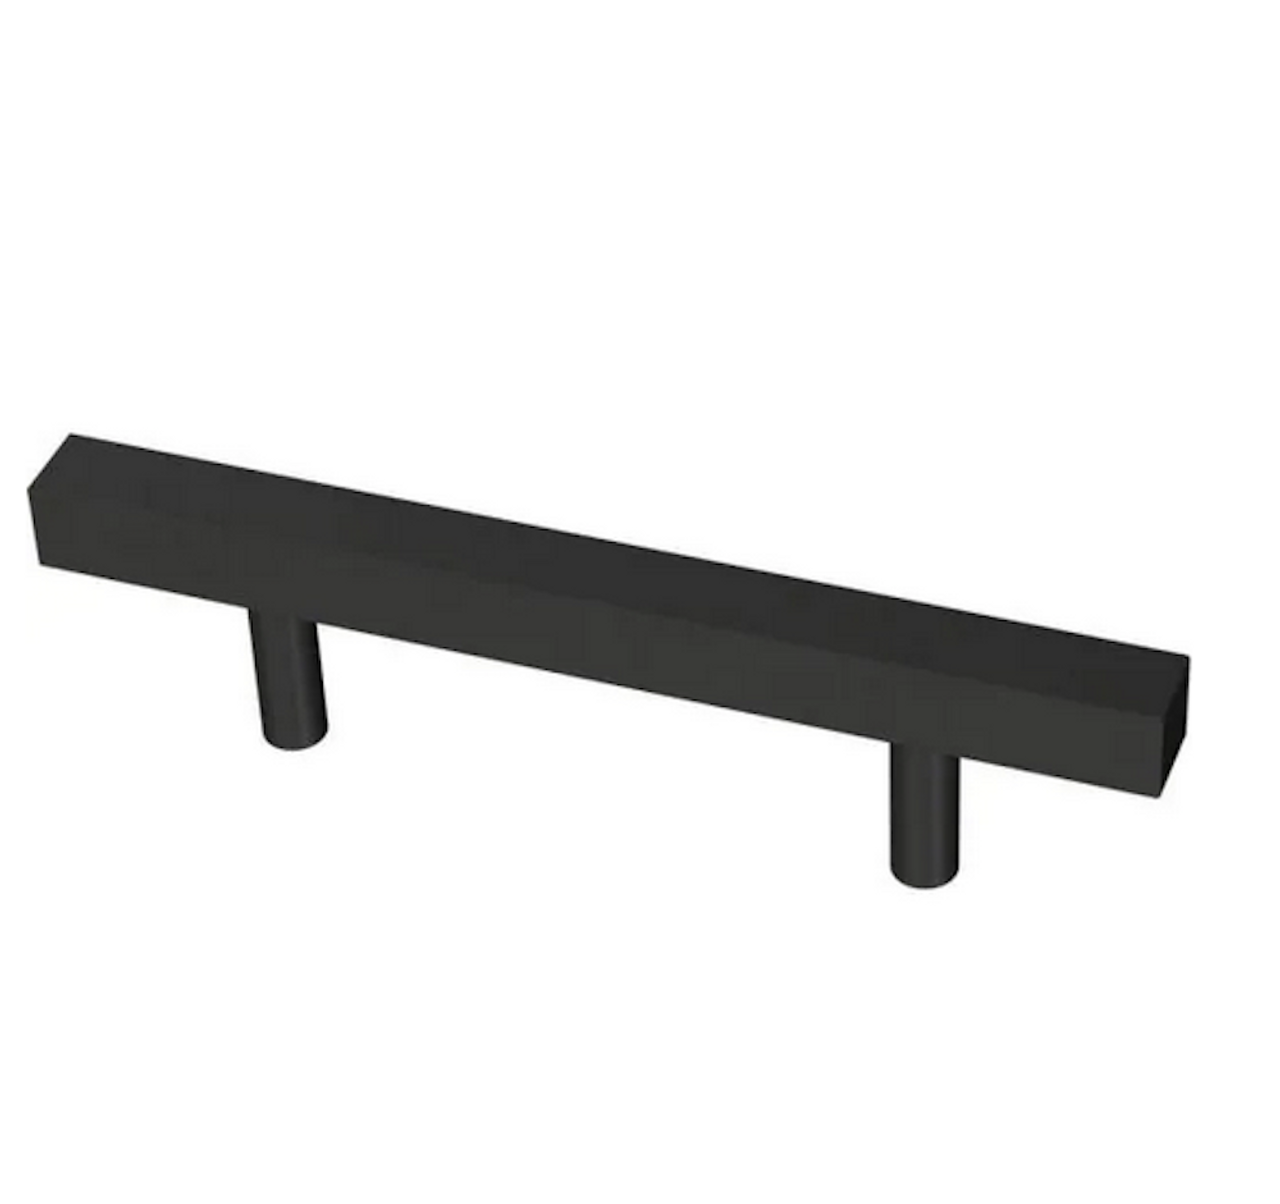 Primary image for Liberty Square Bar 3 in. (76 mm) Matte Black Cabinet Drawer Pull